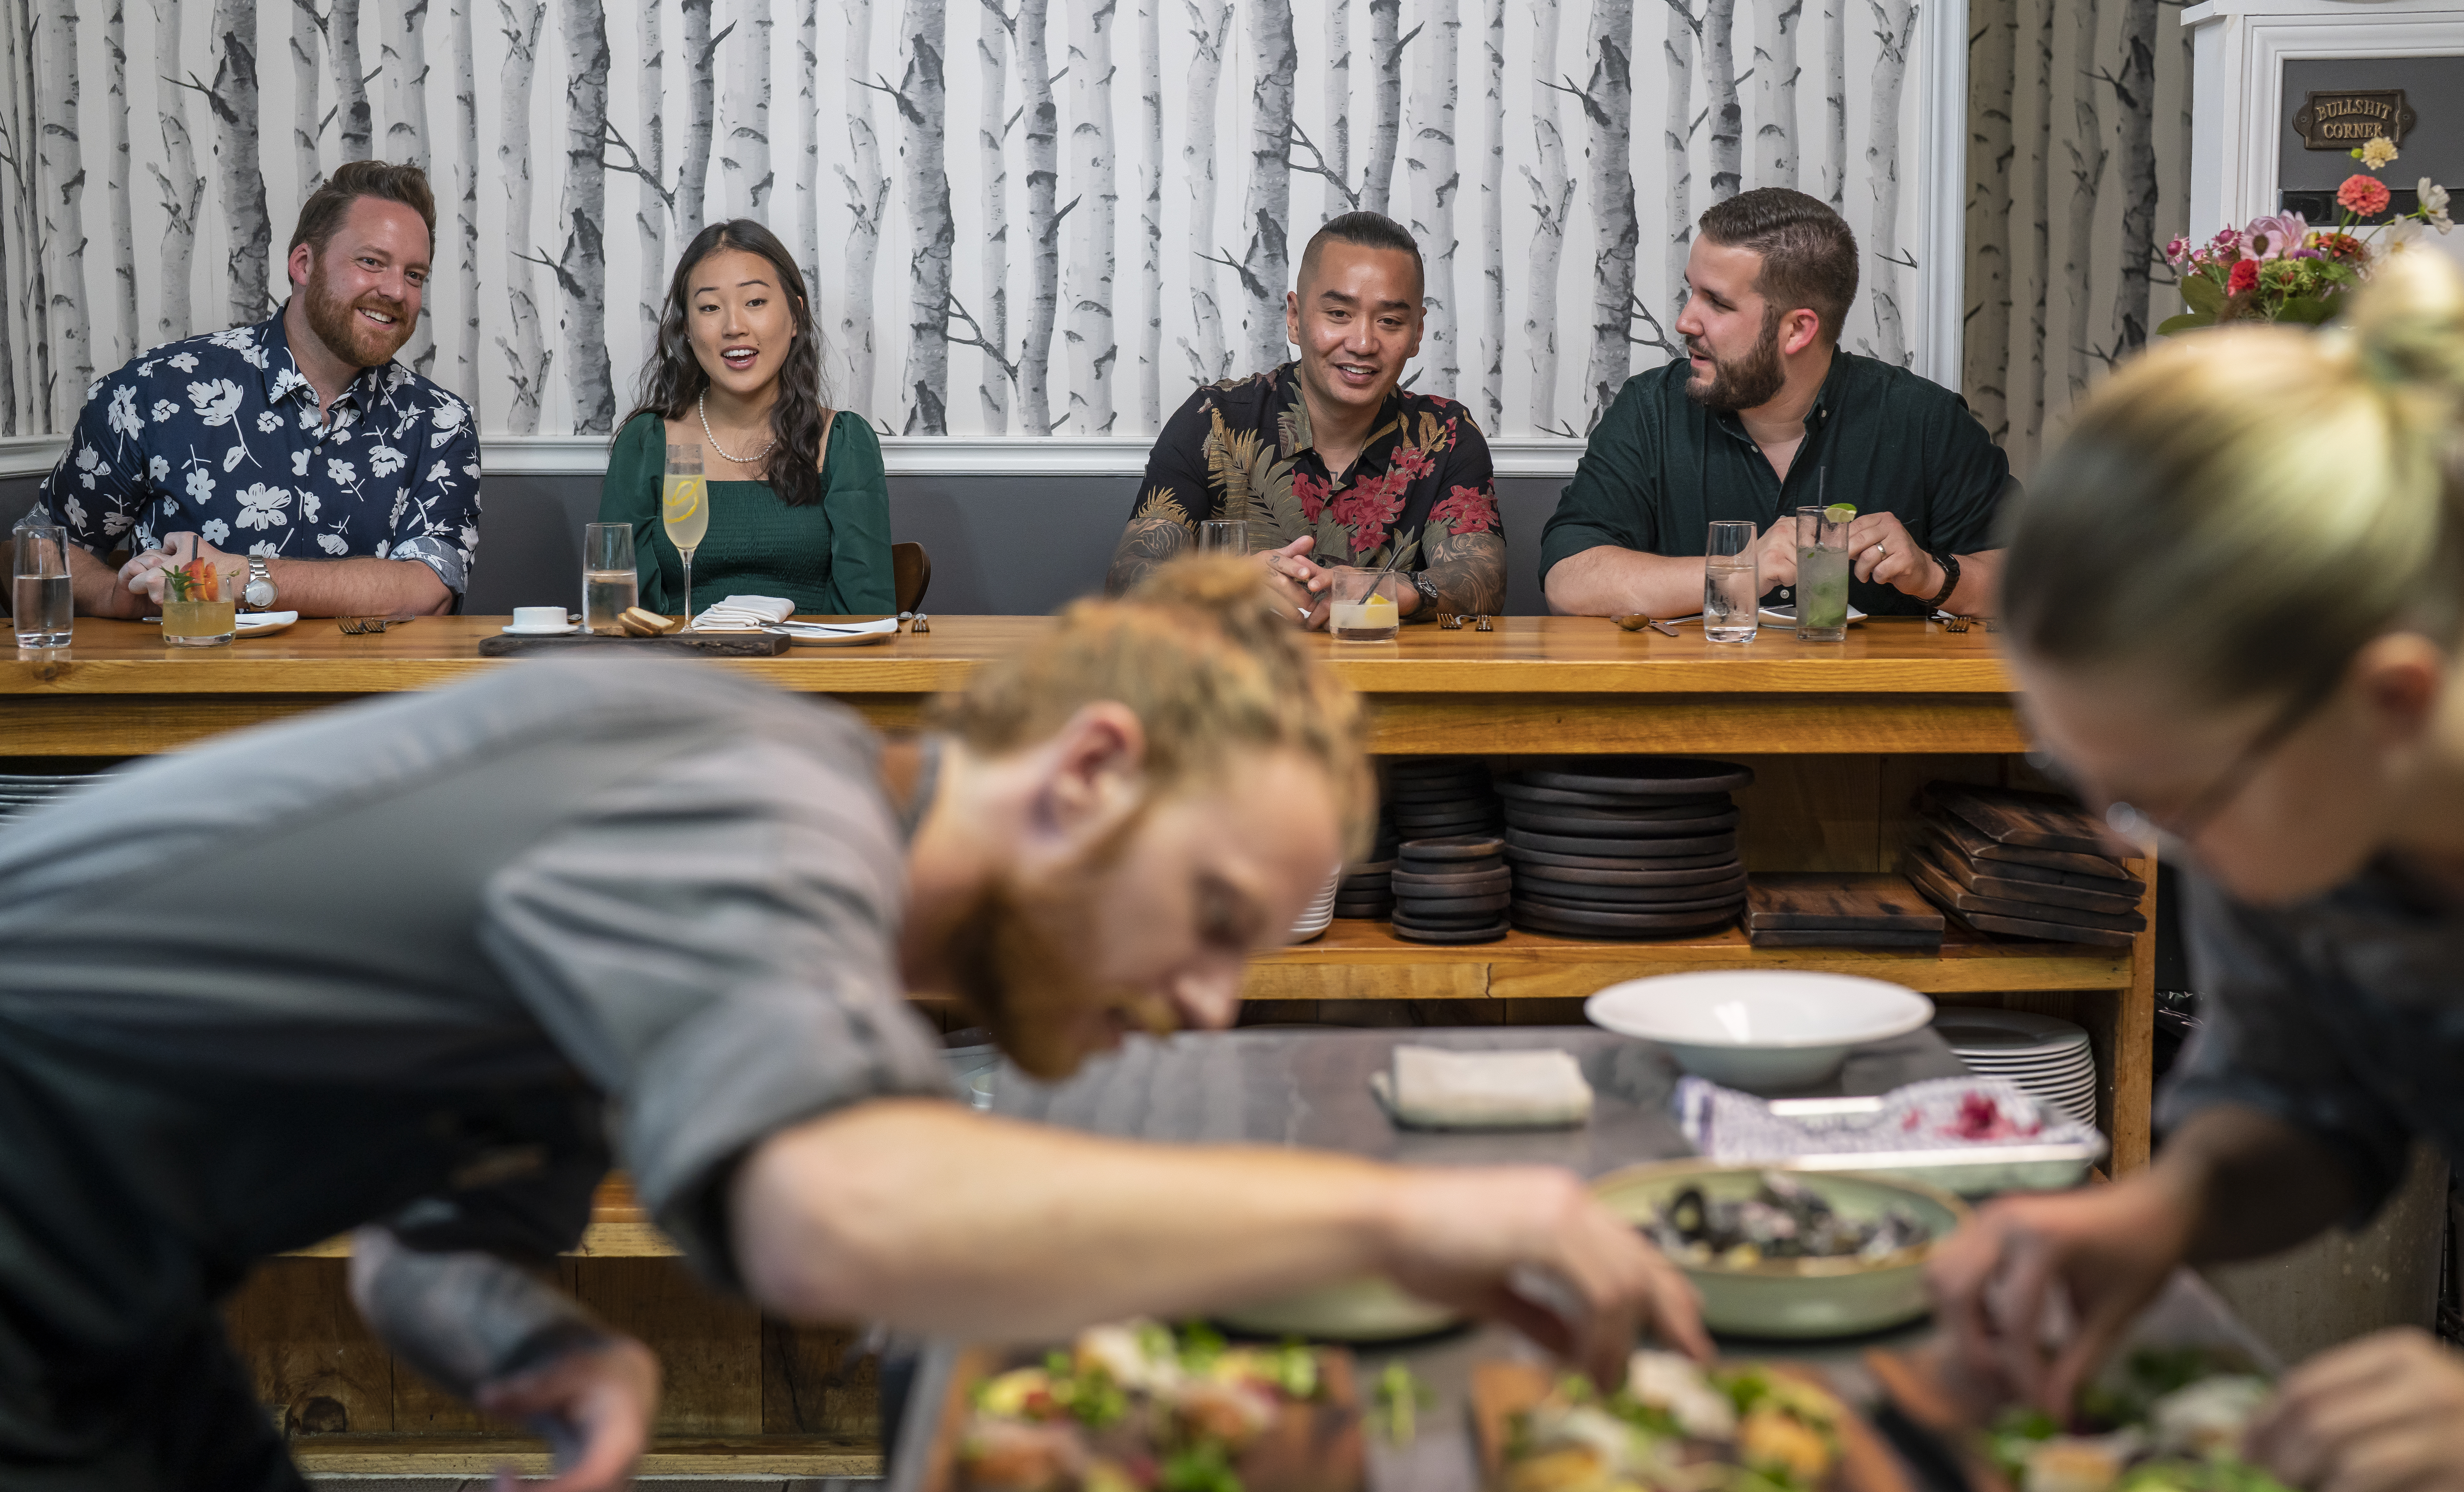 sixthirtynine guests laughing together in background as chef plates intently